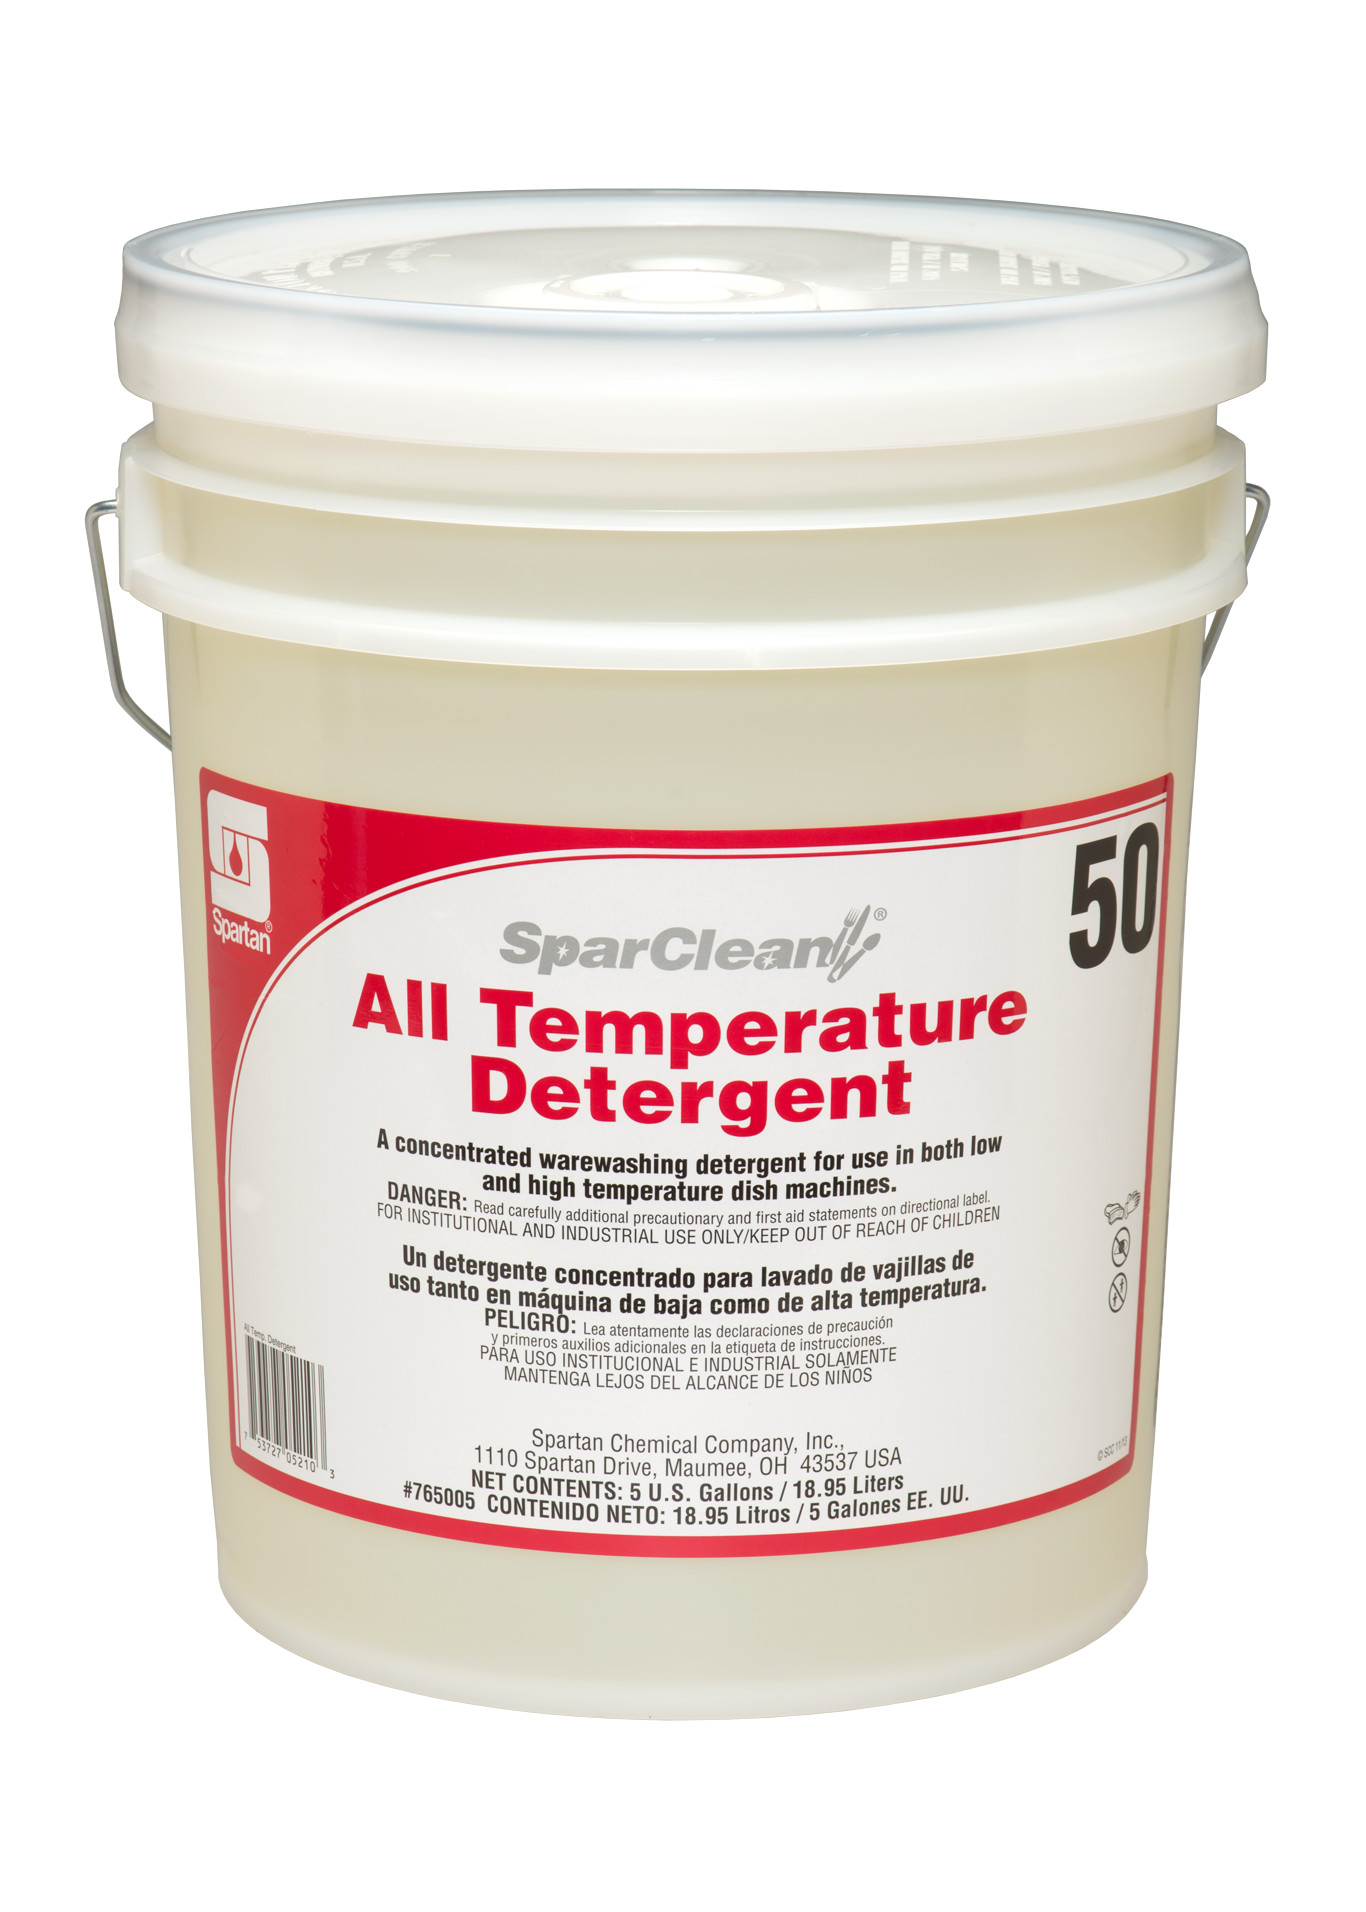 Spartan Chemical Company SparClean All Temperature Detergent 50, 5 GAL PAIL